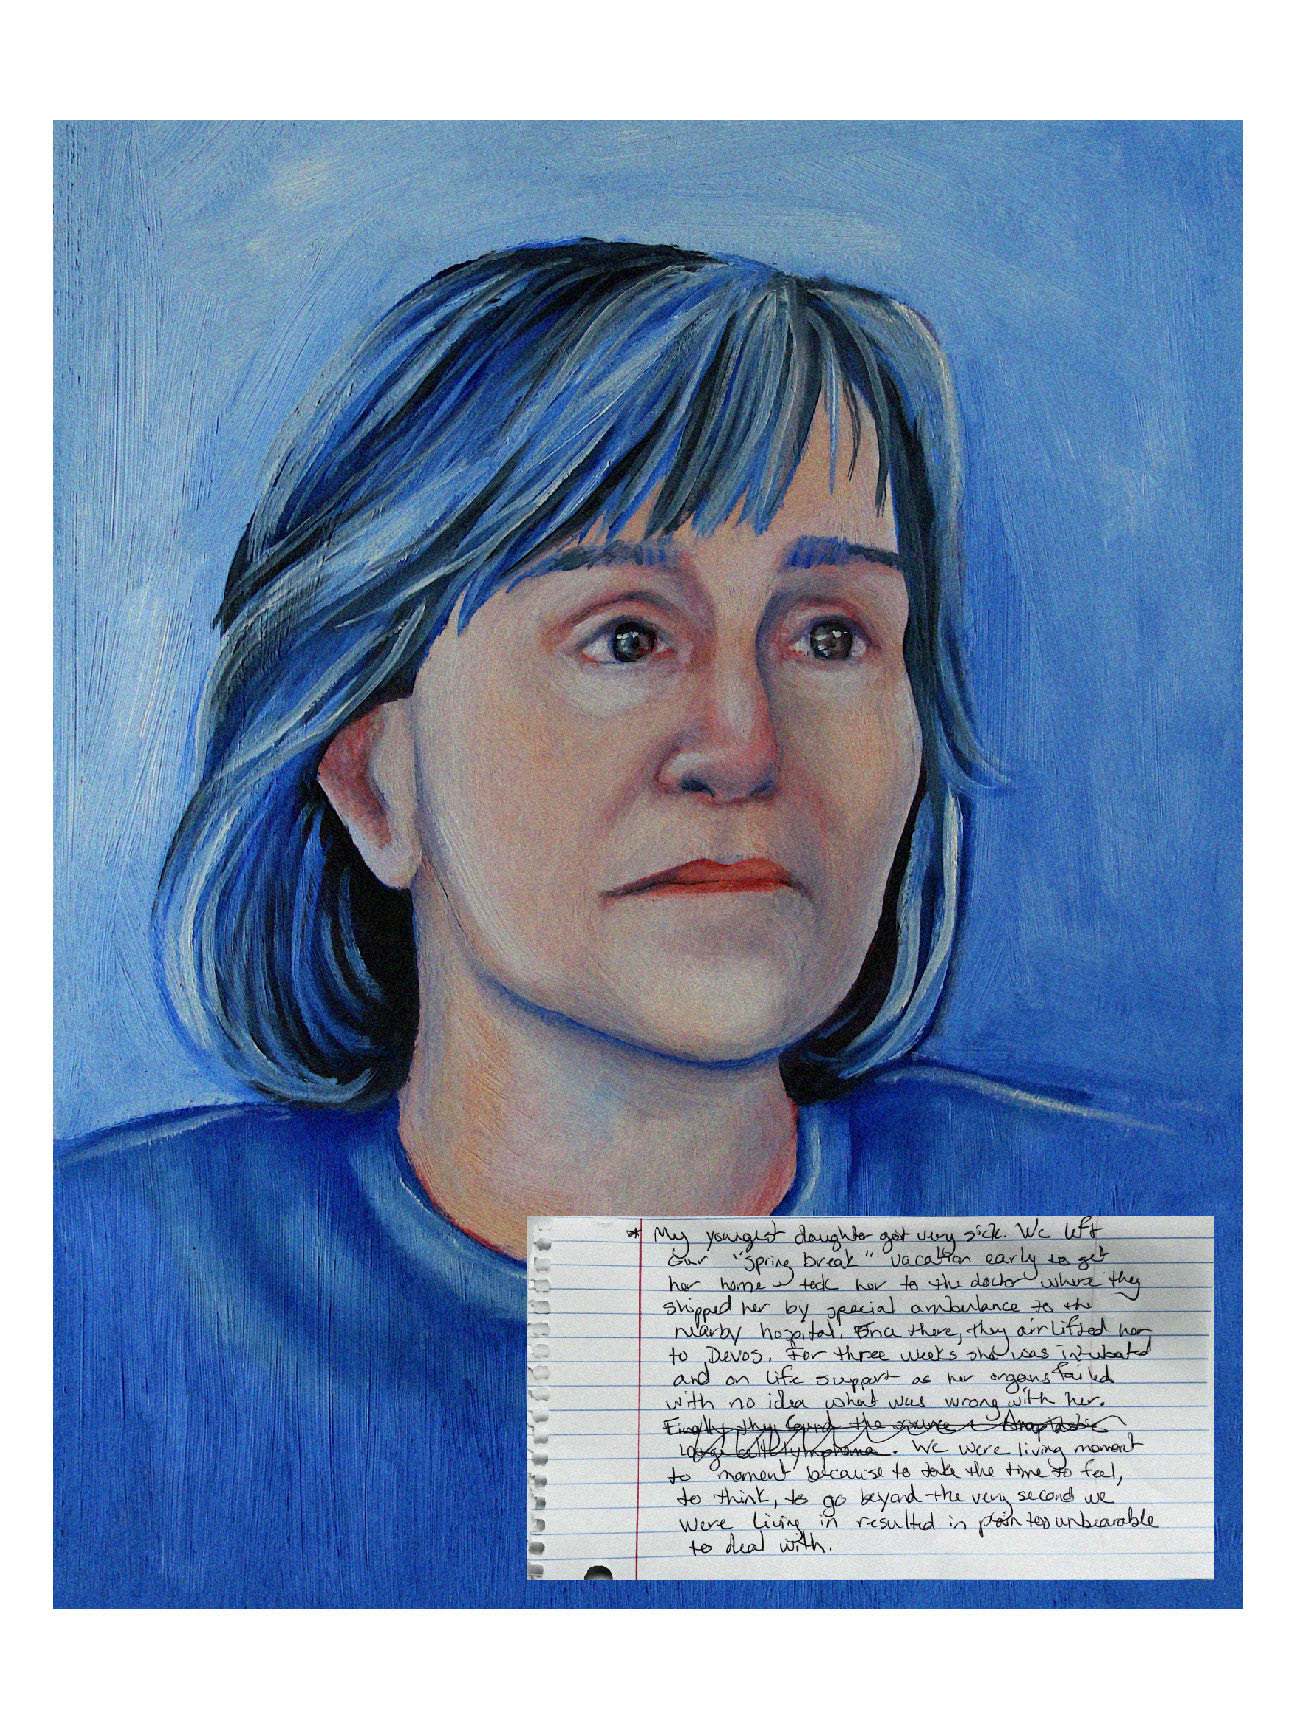 A painting of my mom, a brunette with bangs, looking blue and numbly off into the distance.